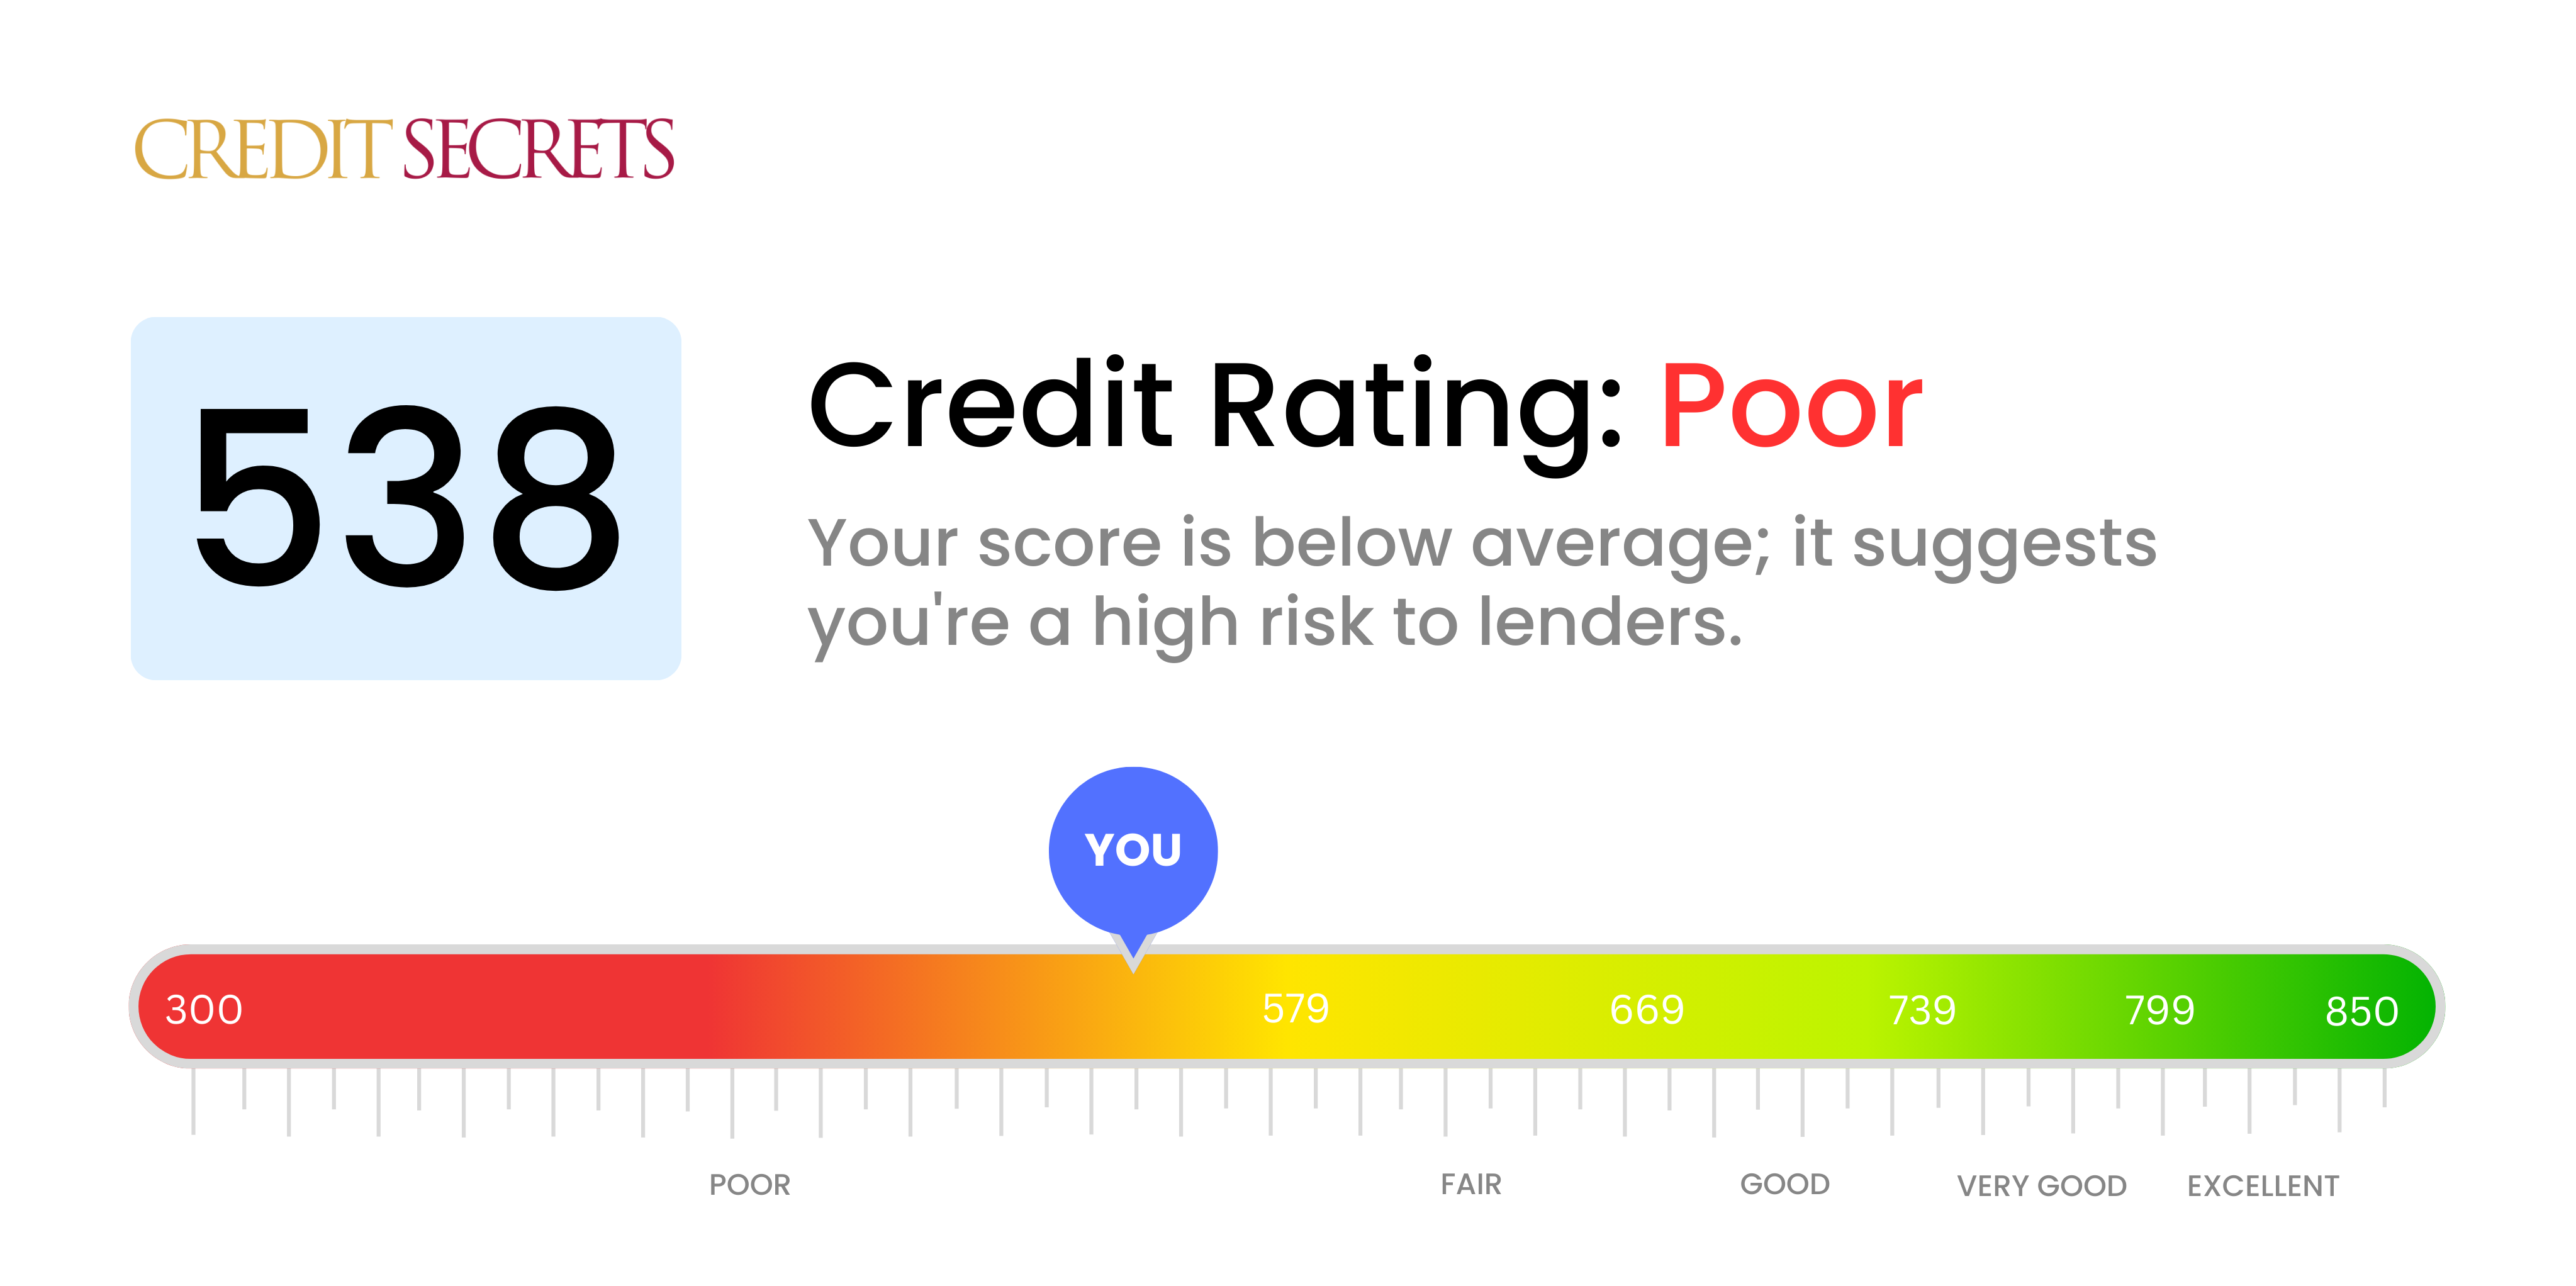 Is 538 a good credit score?